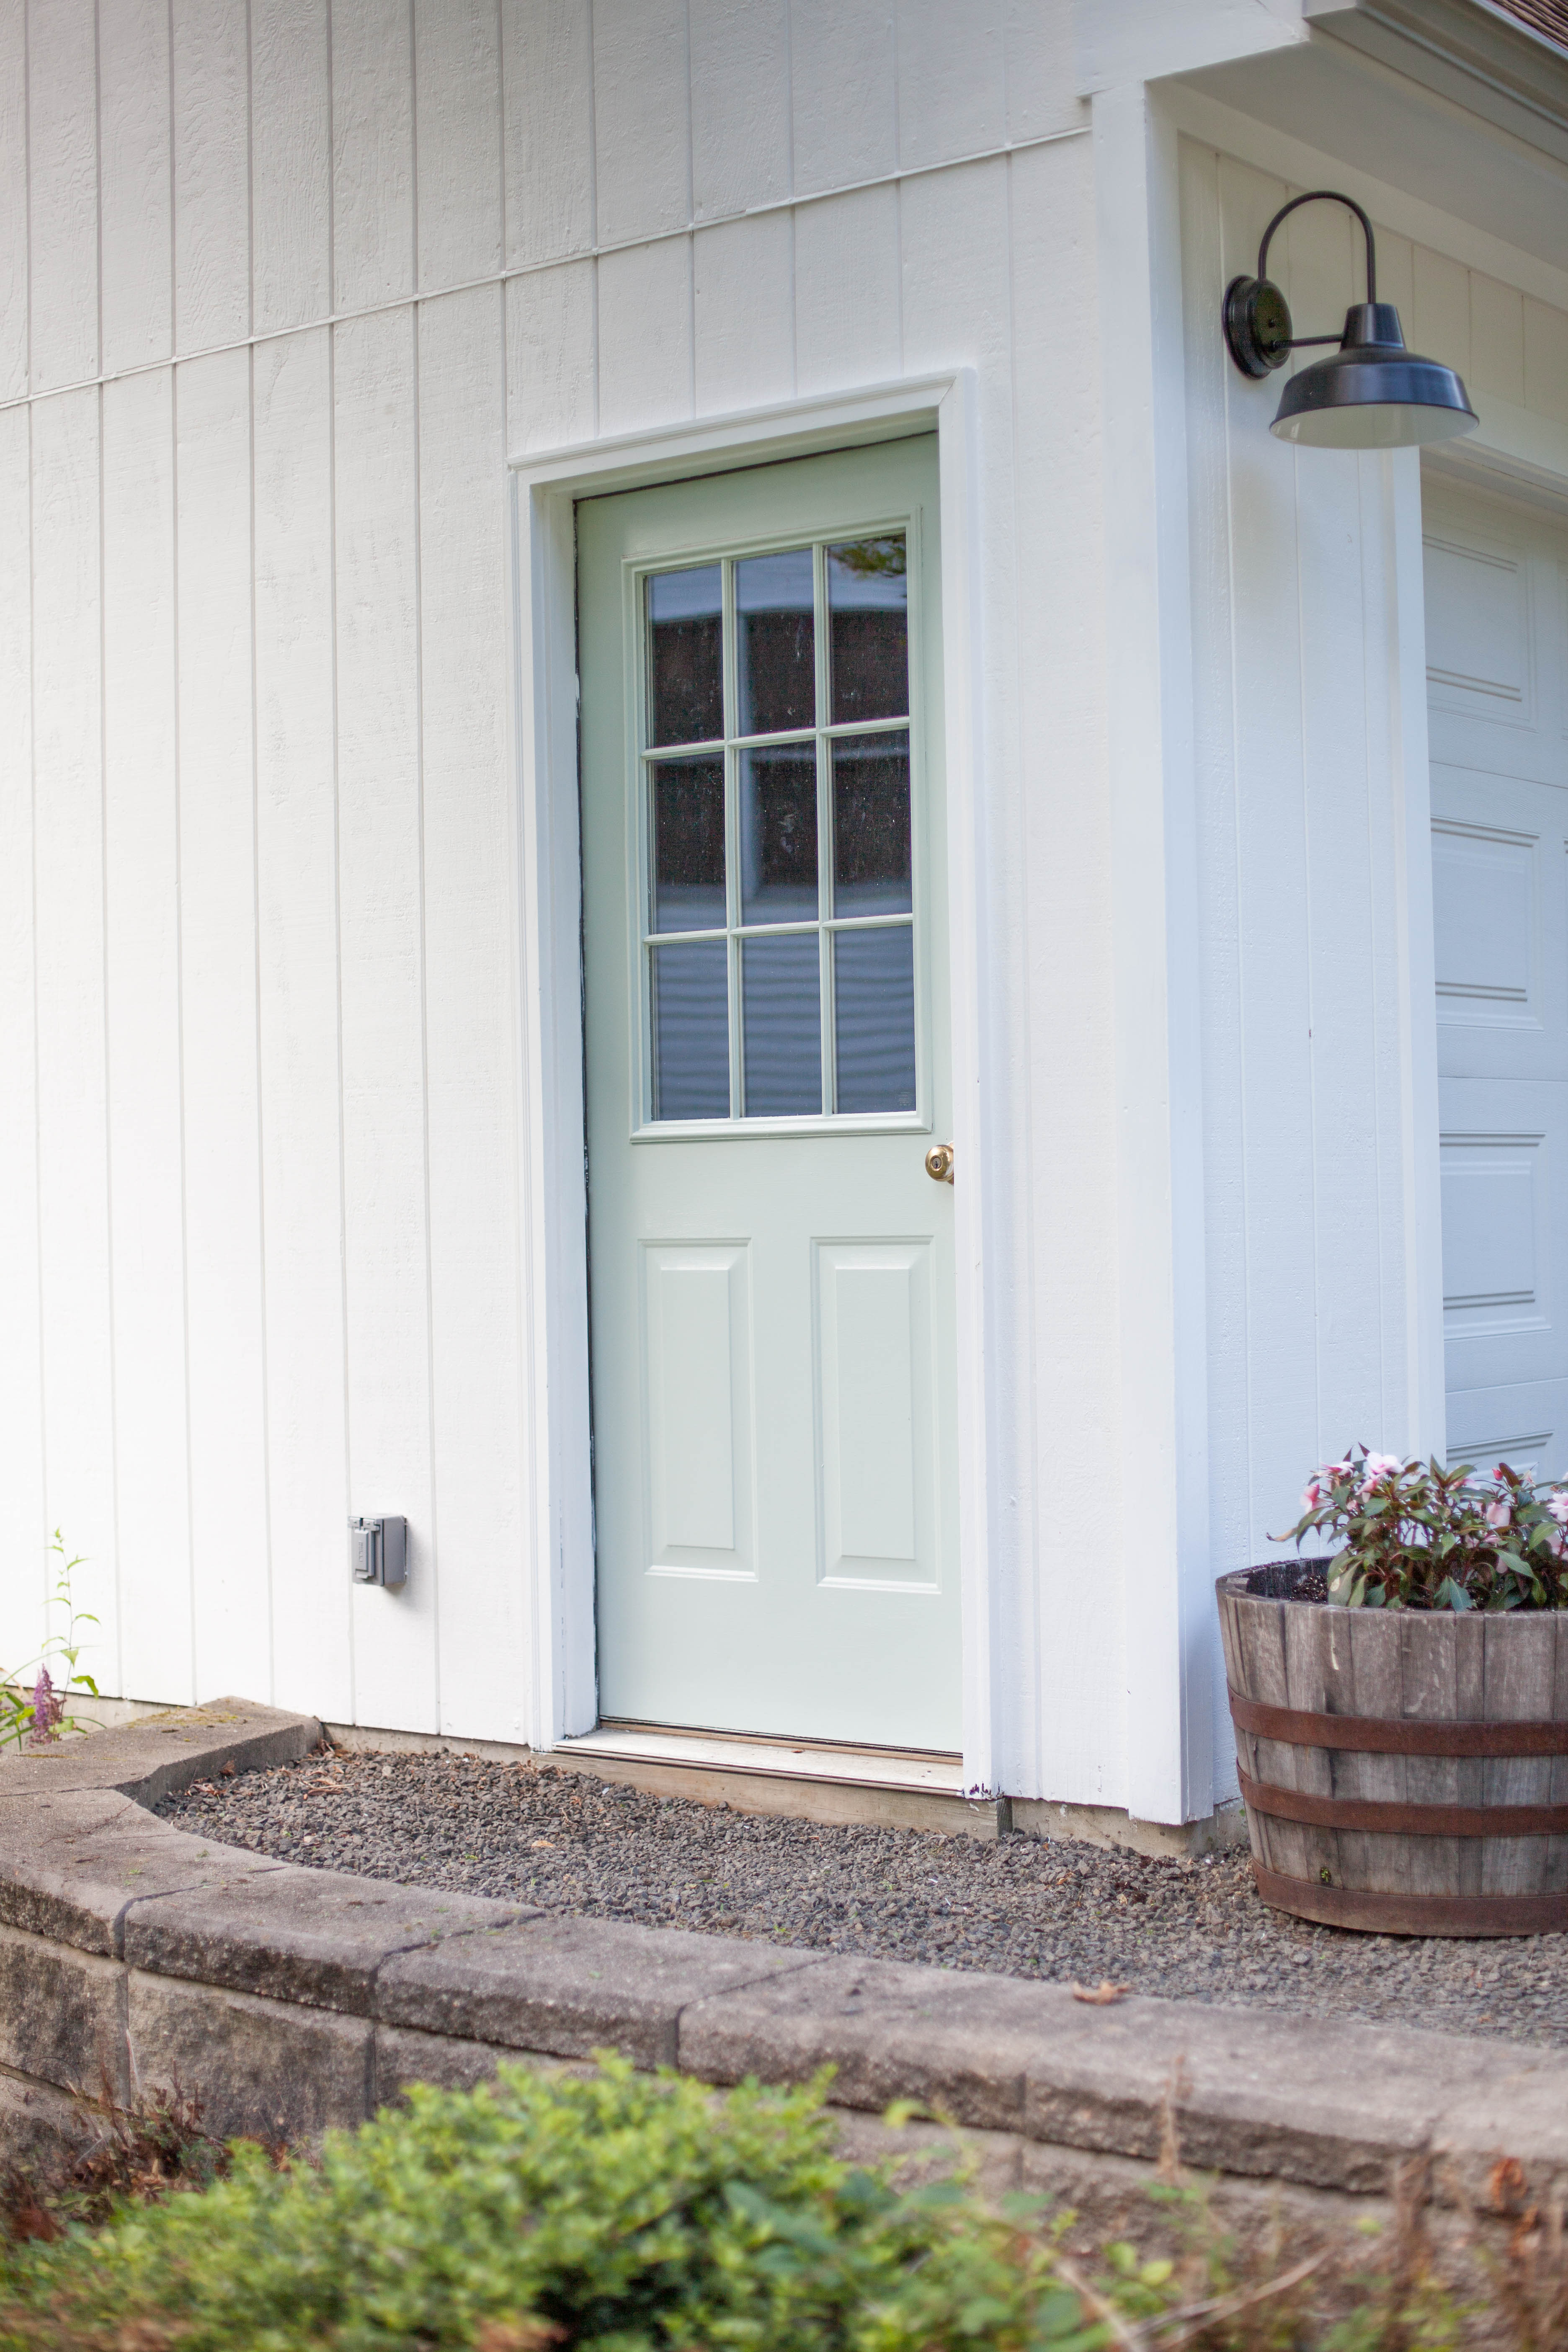 Looking for some budget-friendly ways to improve the exterior of your home? These Easy Ways to Add Curb Appeal are cost effective and make a high impact!